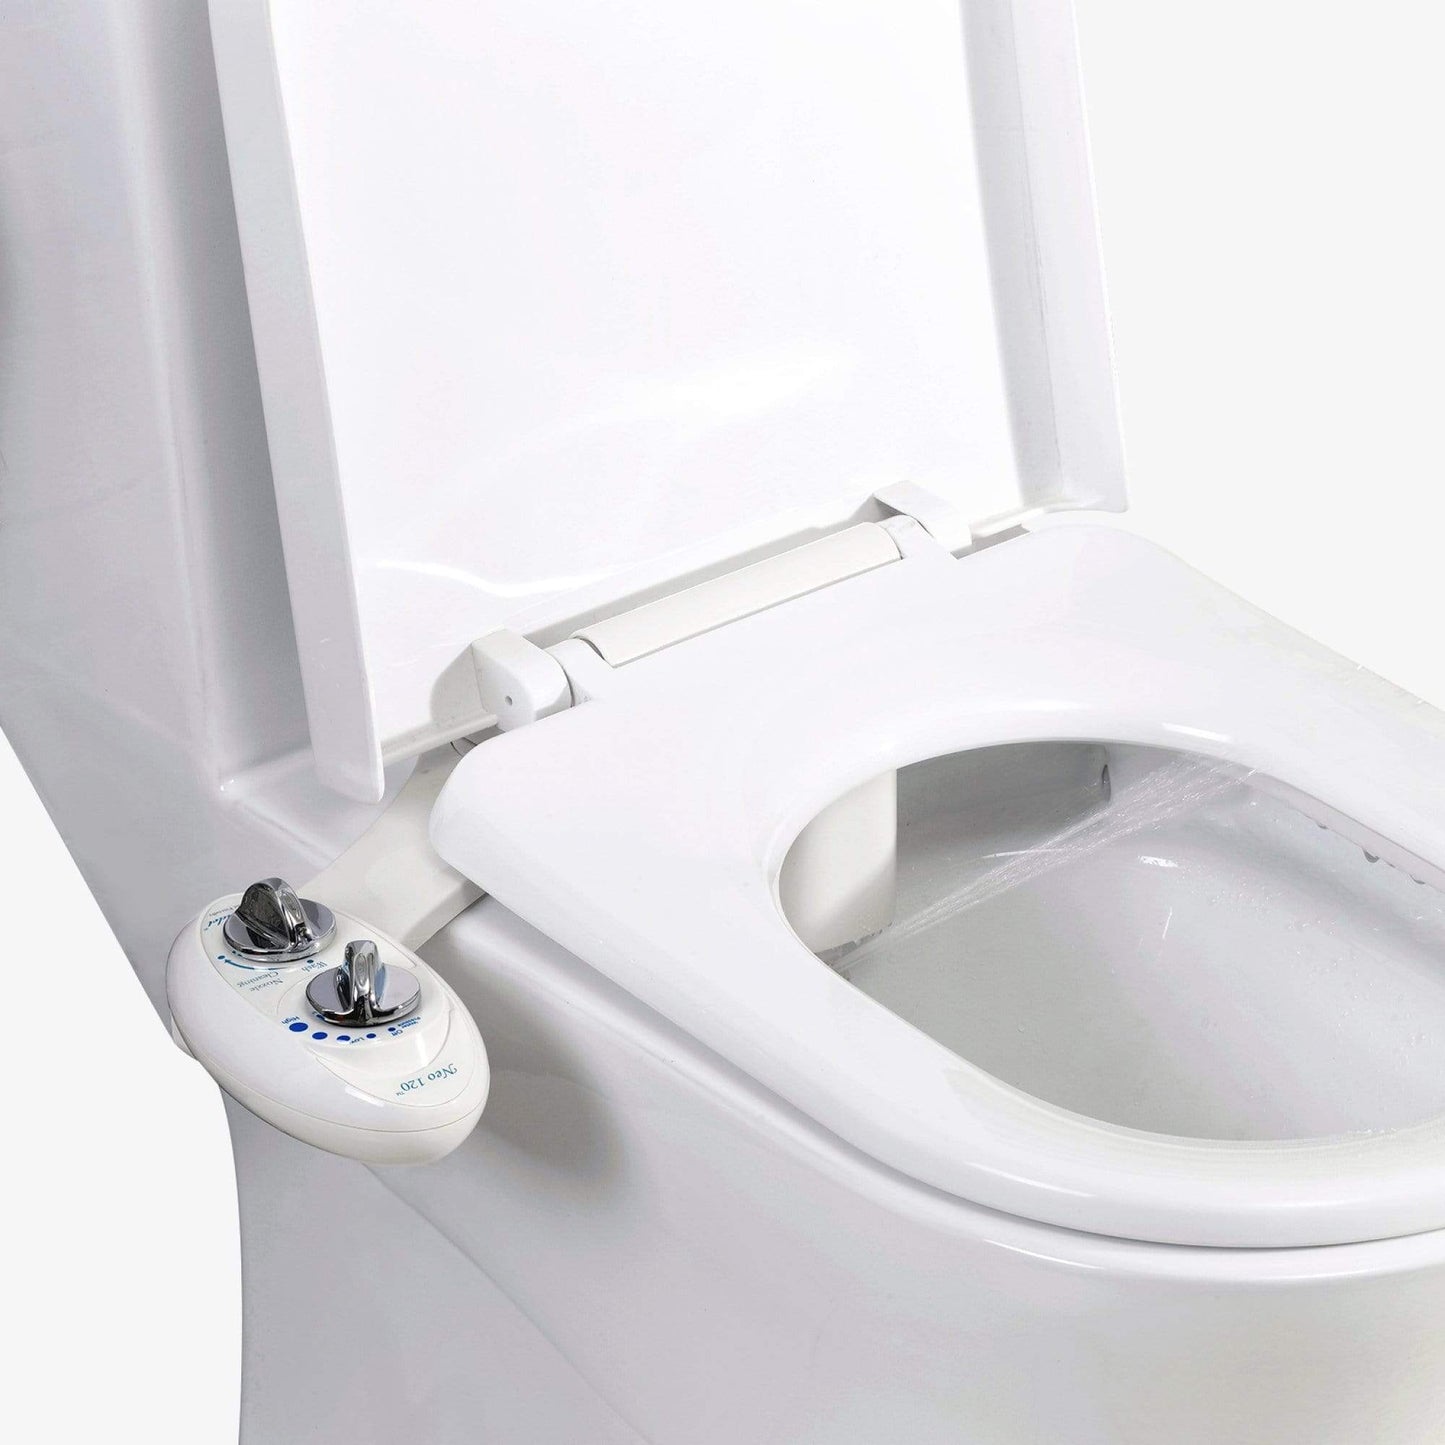 NEO 120 White installed on a toilet with water spraying from nozzles